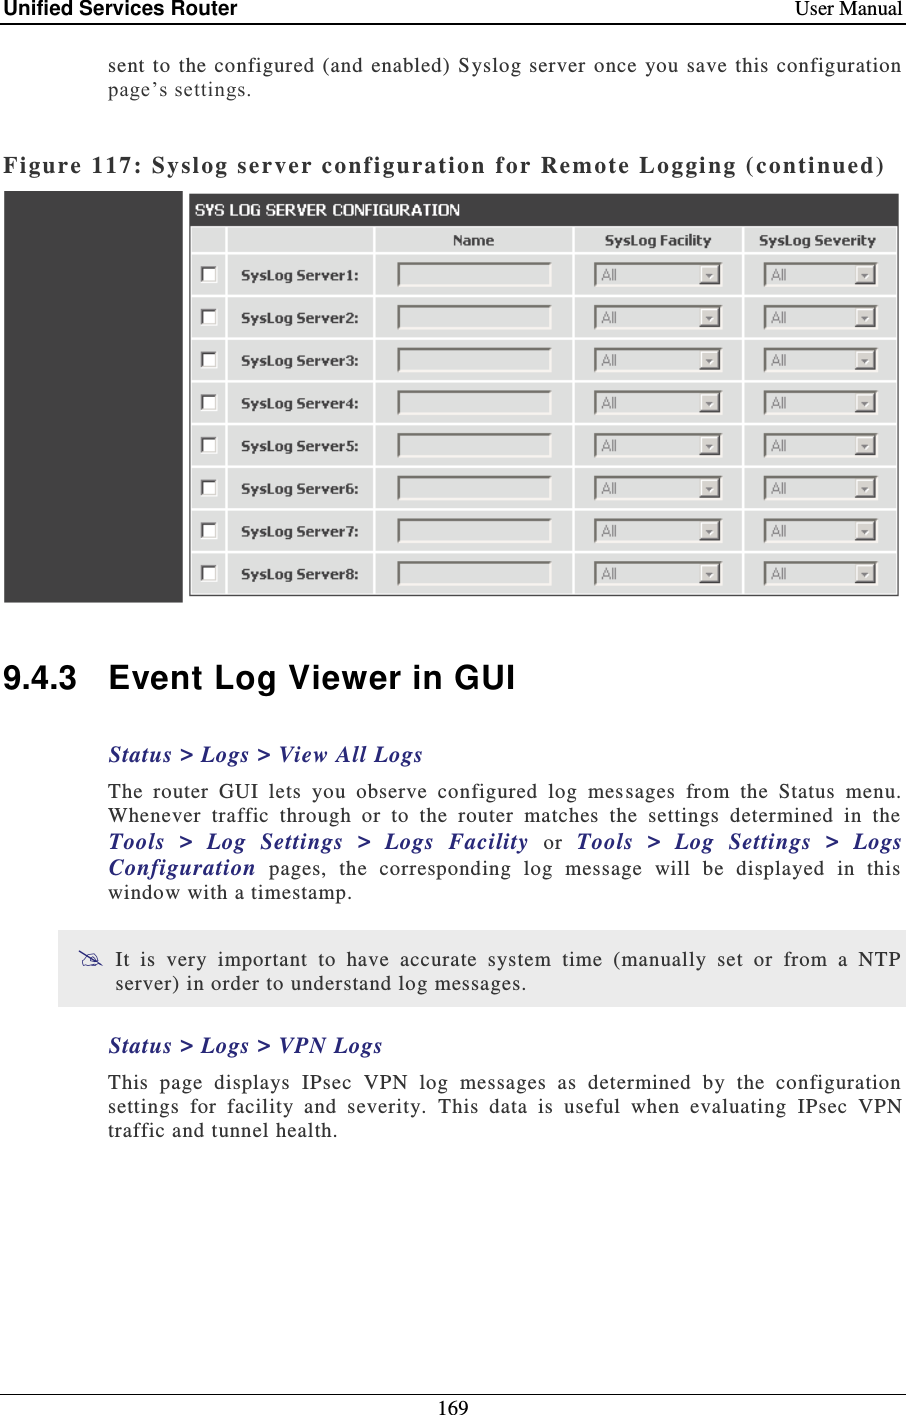 Unified Services Router    User Manual 169  sent to  the  configured (and  enabled)  Syslog server once  you  save  this configuration page’s settings.   Figure 117:  Syslog server conf iguration  for Remote Logging ( conti nued)    9.4.3  Event Log Viewer in GUI Status &gt; Logs &gt; View All Logs The  router  GUI  lets  you  observe  configured  log  mes sages  from  the  Status  menu. Whenever  traffic  through  or  to  the  router  matches  the  settings  determined  in  the Tools  &gt;  Log  Settings  &gt;  Logs  Facility  or  Tools  &gt;  Log  Settings  &gt;  Logs Configuration  pages,  the  corresponding  log  message  will  be  displayed  in  this window with a timestamp.   It  is  very  important  to  have  accurate  system  time  (manually  set  or  from  a  NTP server) in order to understand log messages.  Status &gt; Logs &gt; VPN Logs This  page  displays  IPsec  VPN  log  messages  as  determined  by  the  configuration settings  for  facility  and  severity.  This  data  is  useful  when  evaluating  IPsec  VPN traffic and tunnel health.  